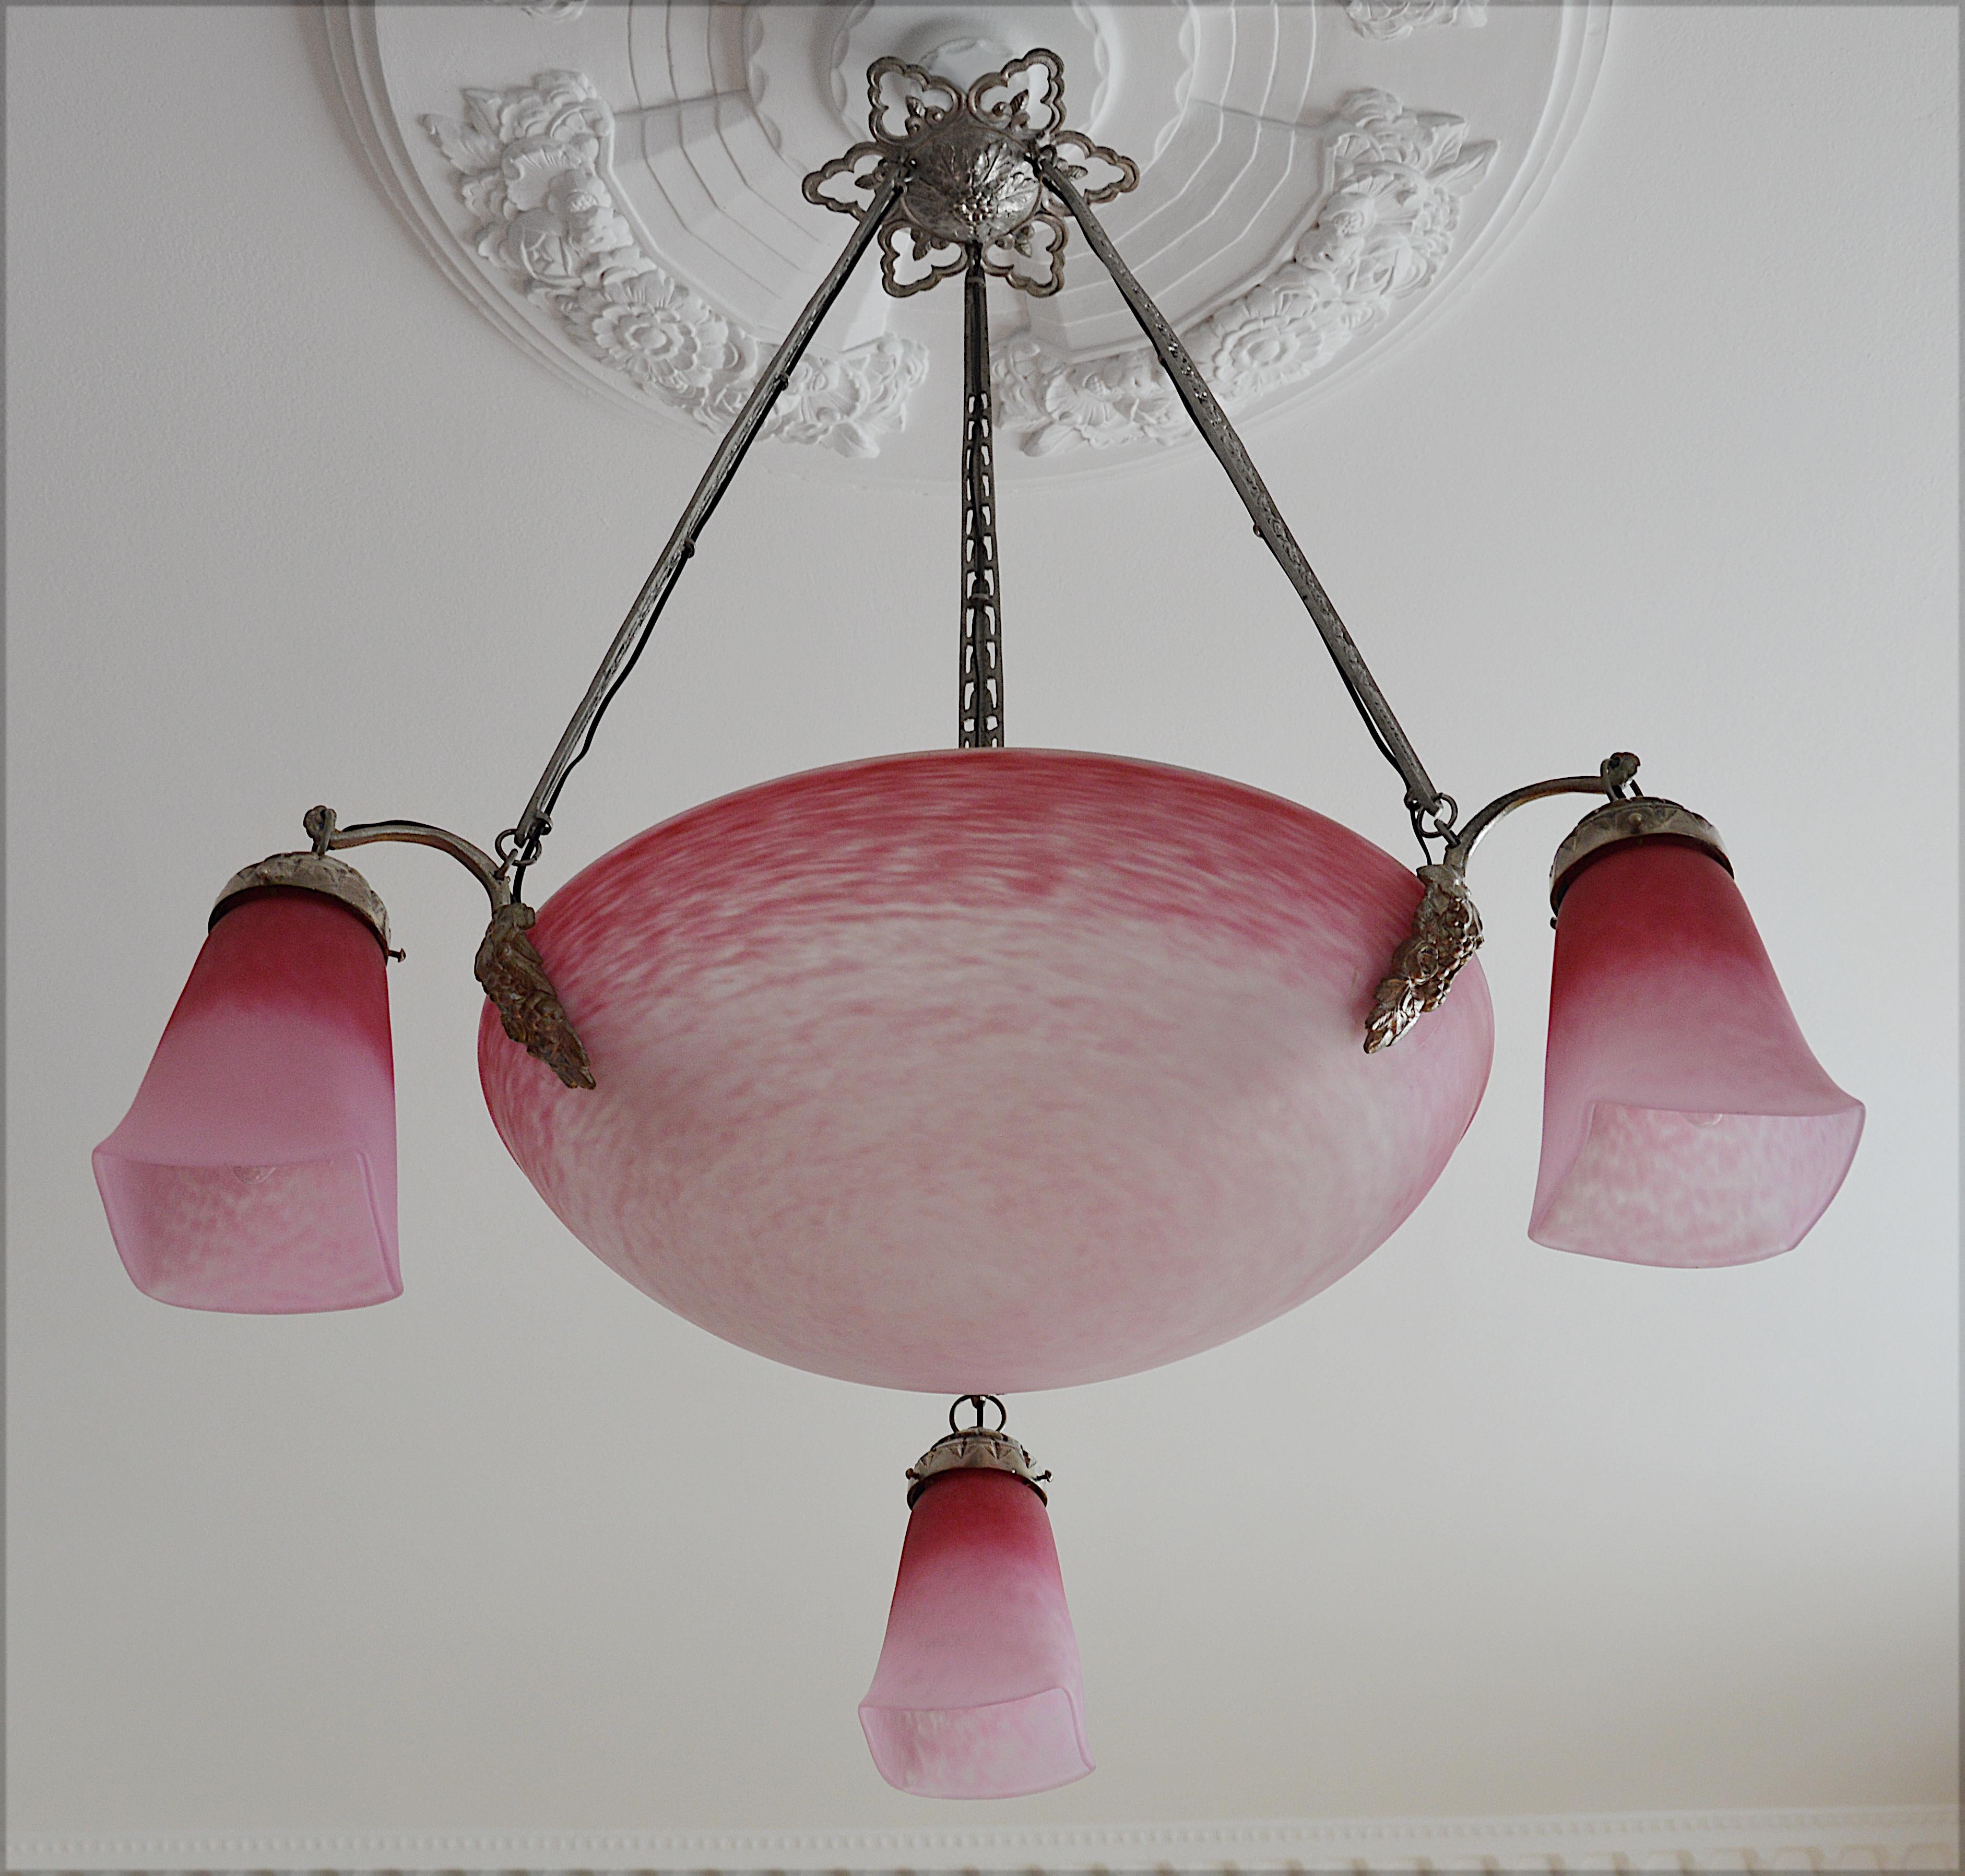 French Art Deco chandelier by Charles Schneider (Epinay-sur-Seine, Paris), France, 1924-1928. Mottled glass shades, powders are applied between two layers that comes hung at their original silver plated bronze fixture. Colors: Pink and white.